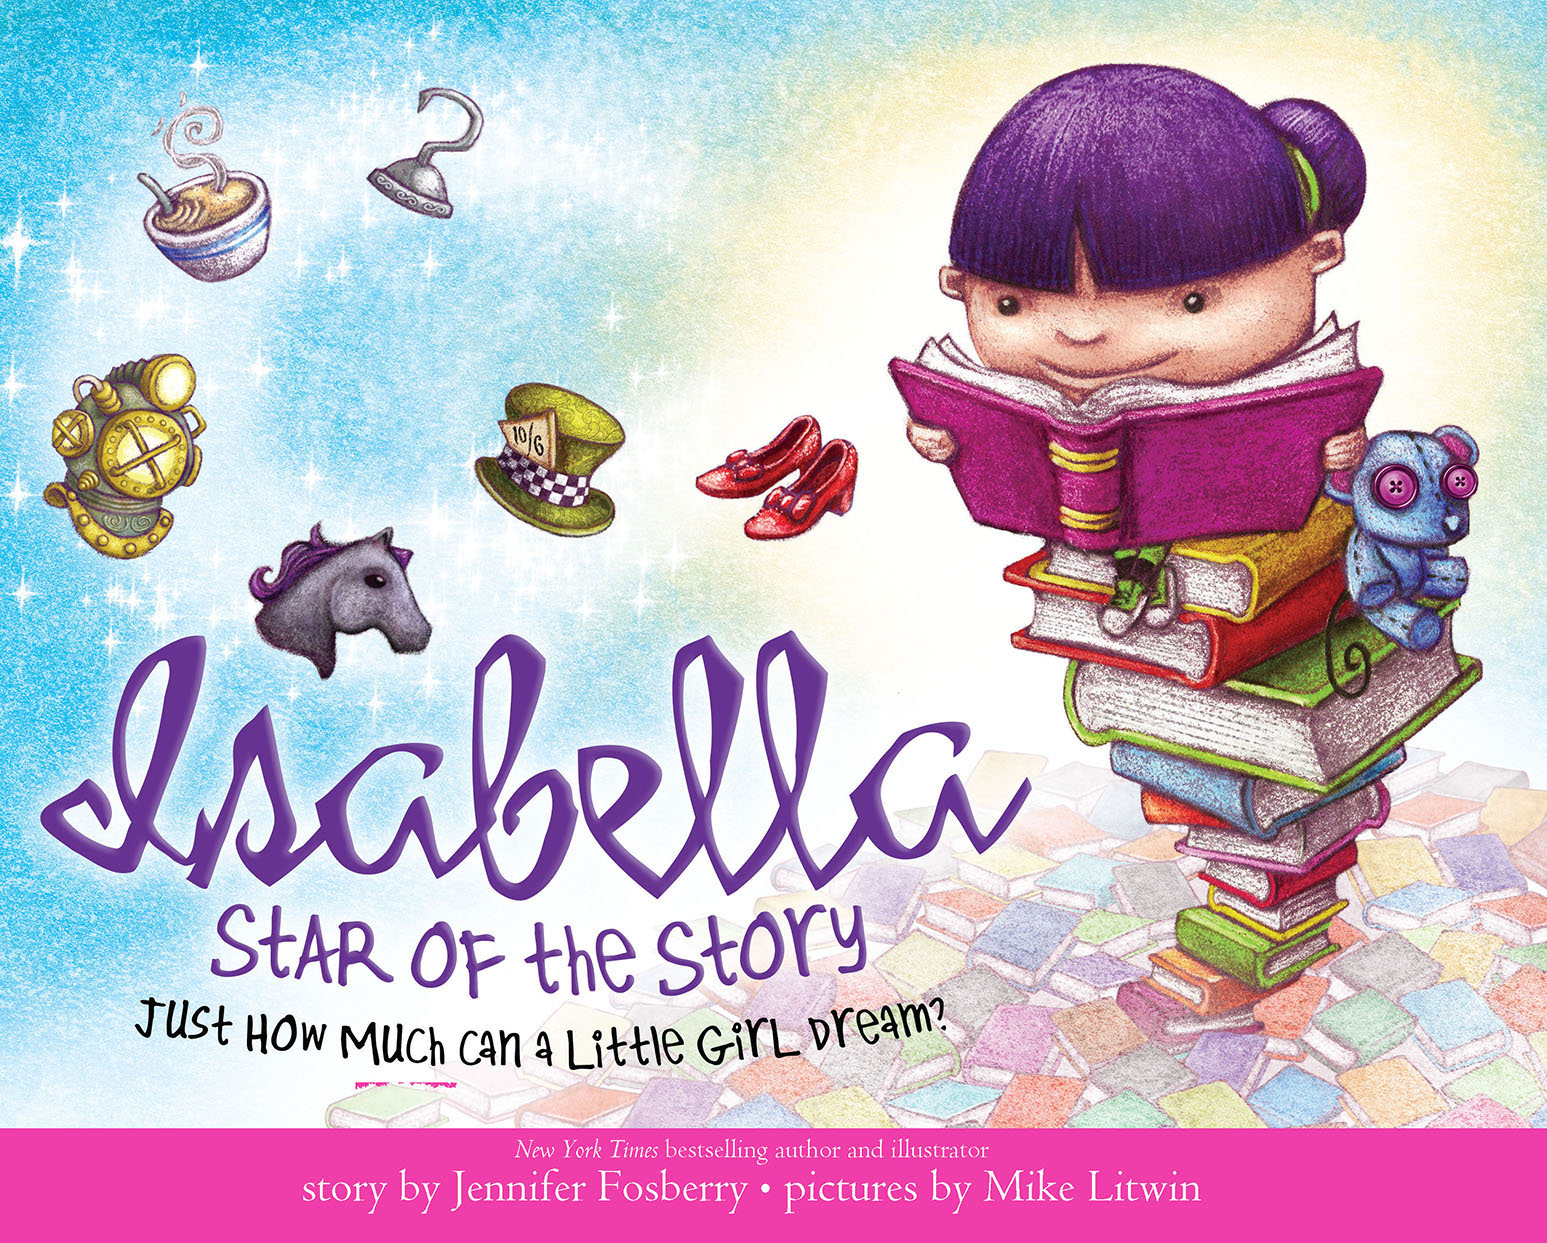 This image is the cover for the book Isabella: Star of the Story